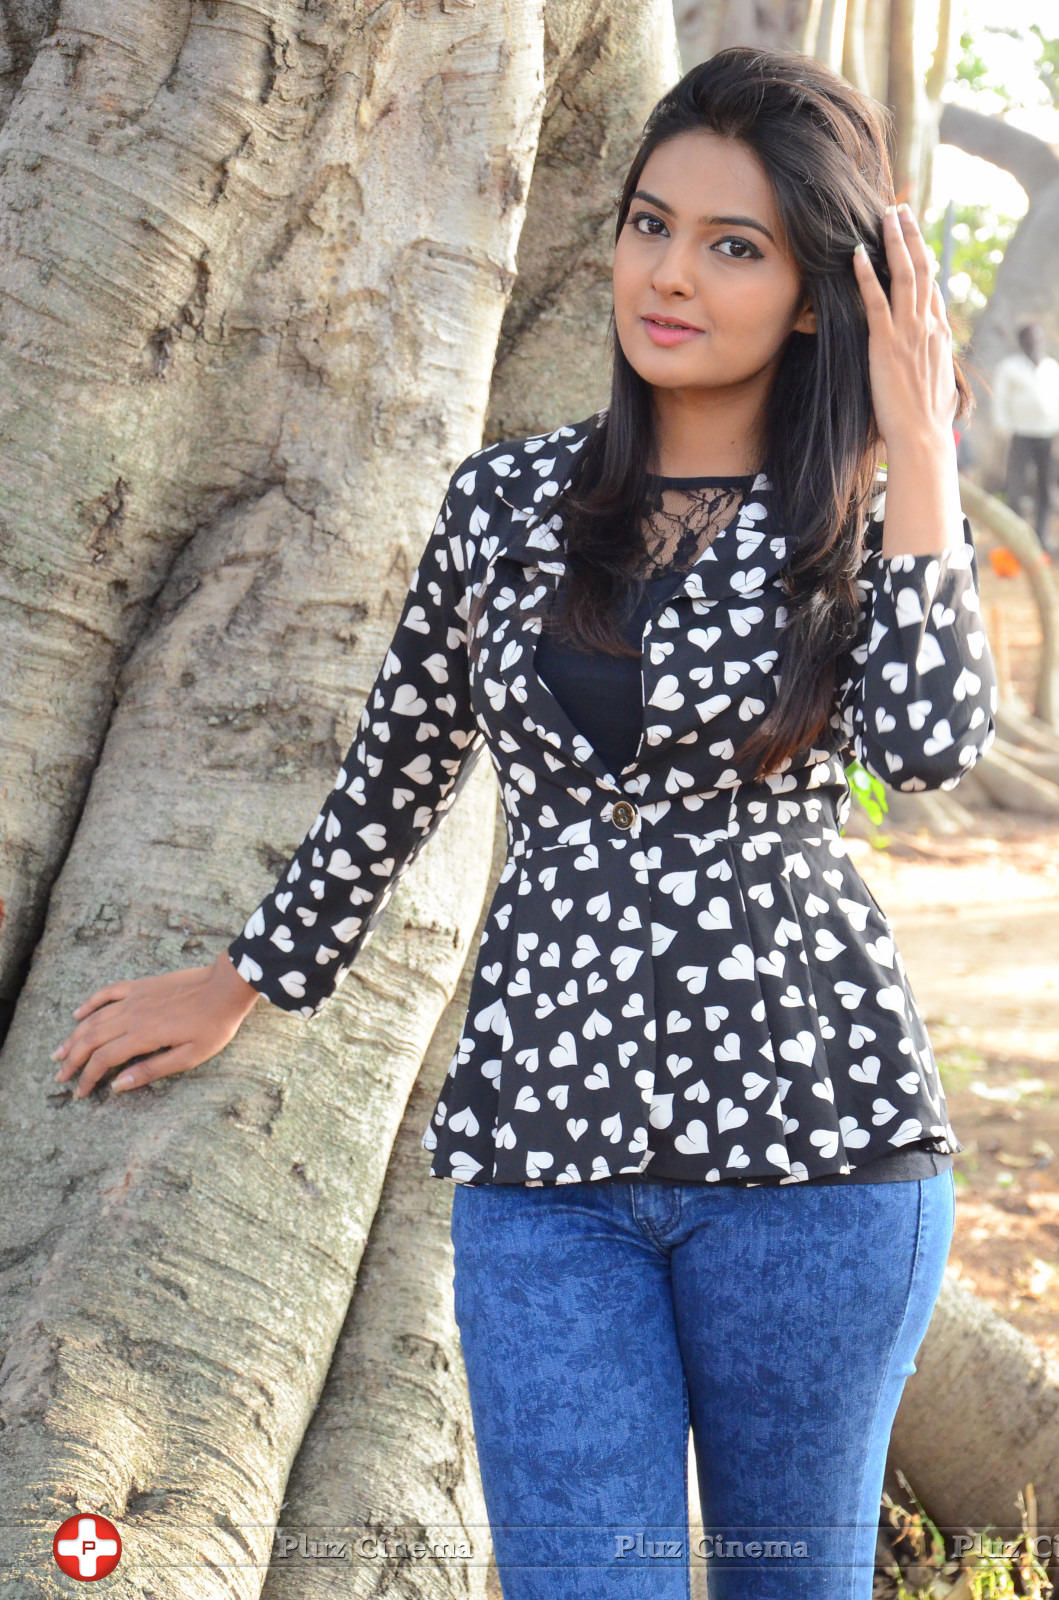 Neha Deshpande - The Bells Movie New Photos | Picture 901798